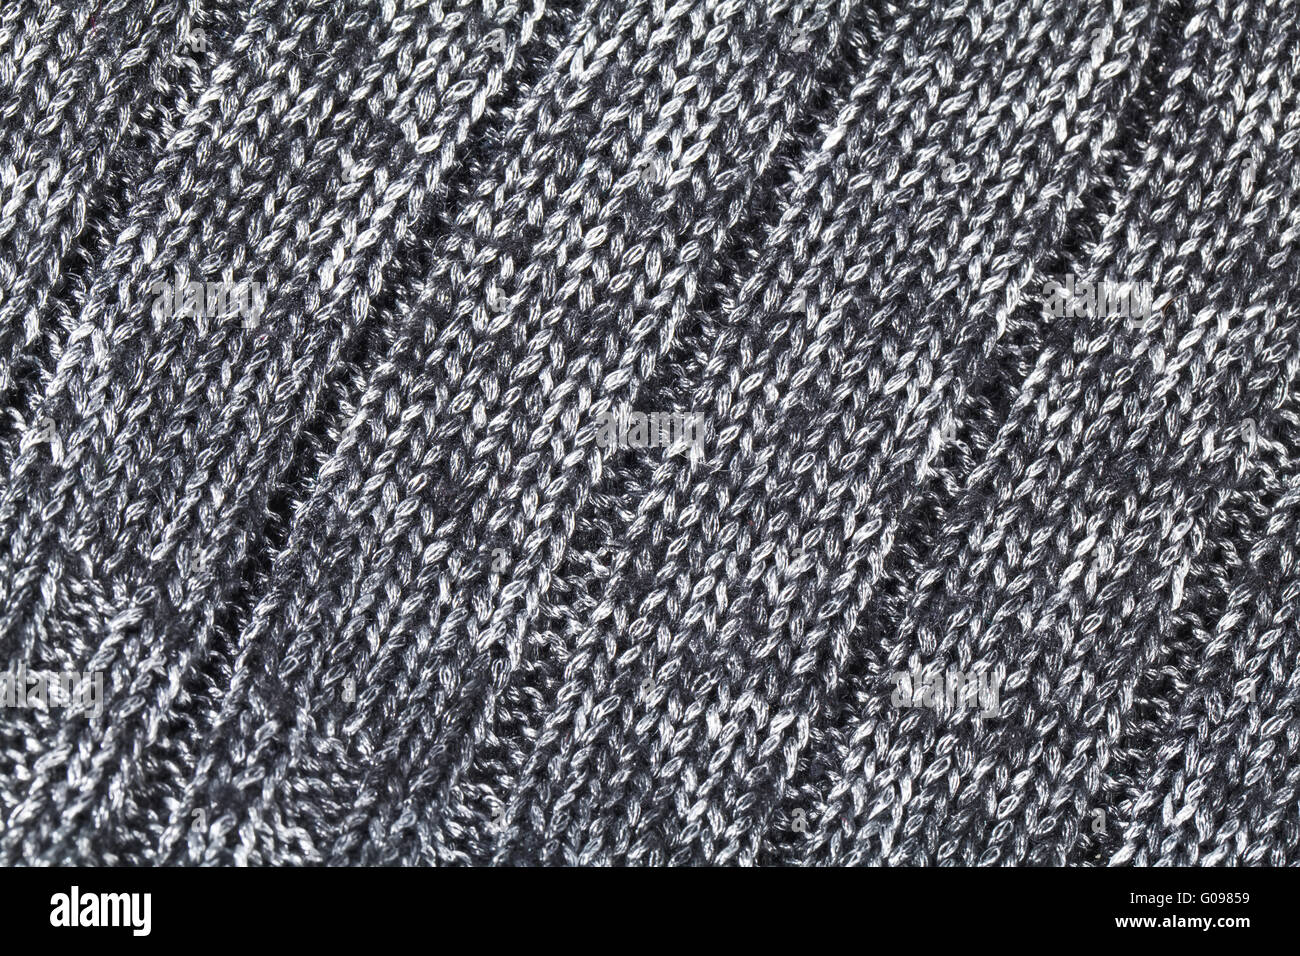 Wool knitted background in black and white close view Stock Photo